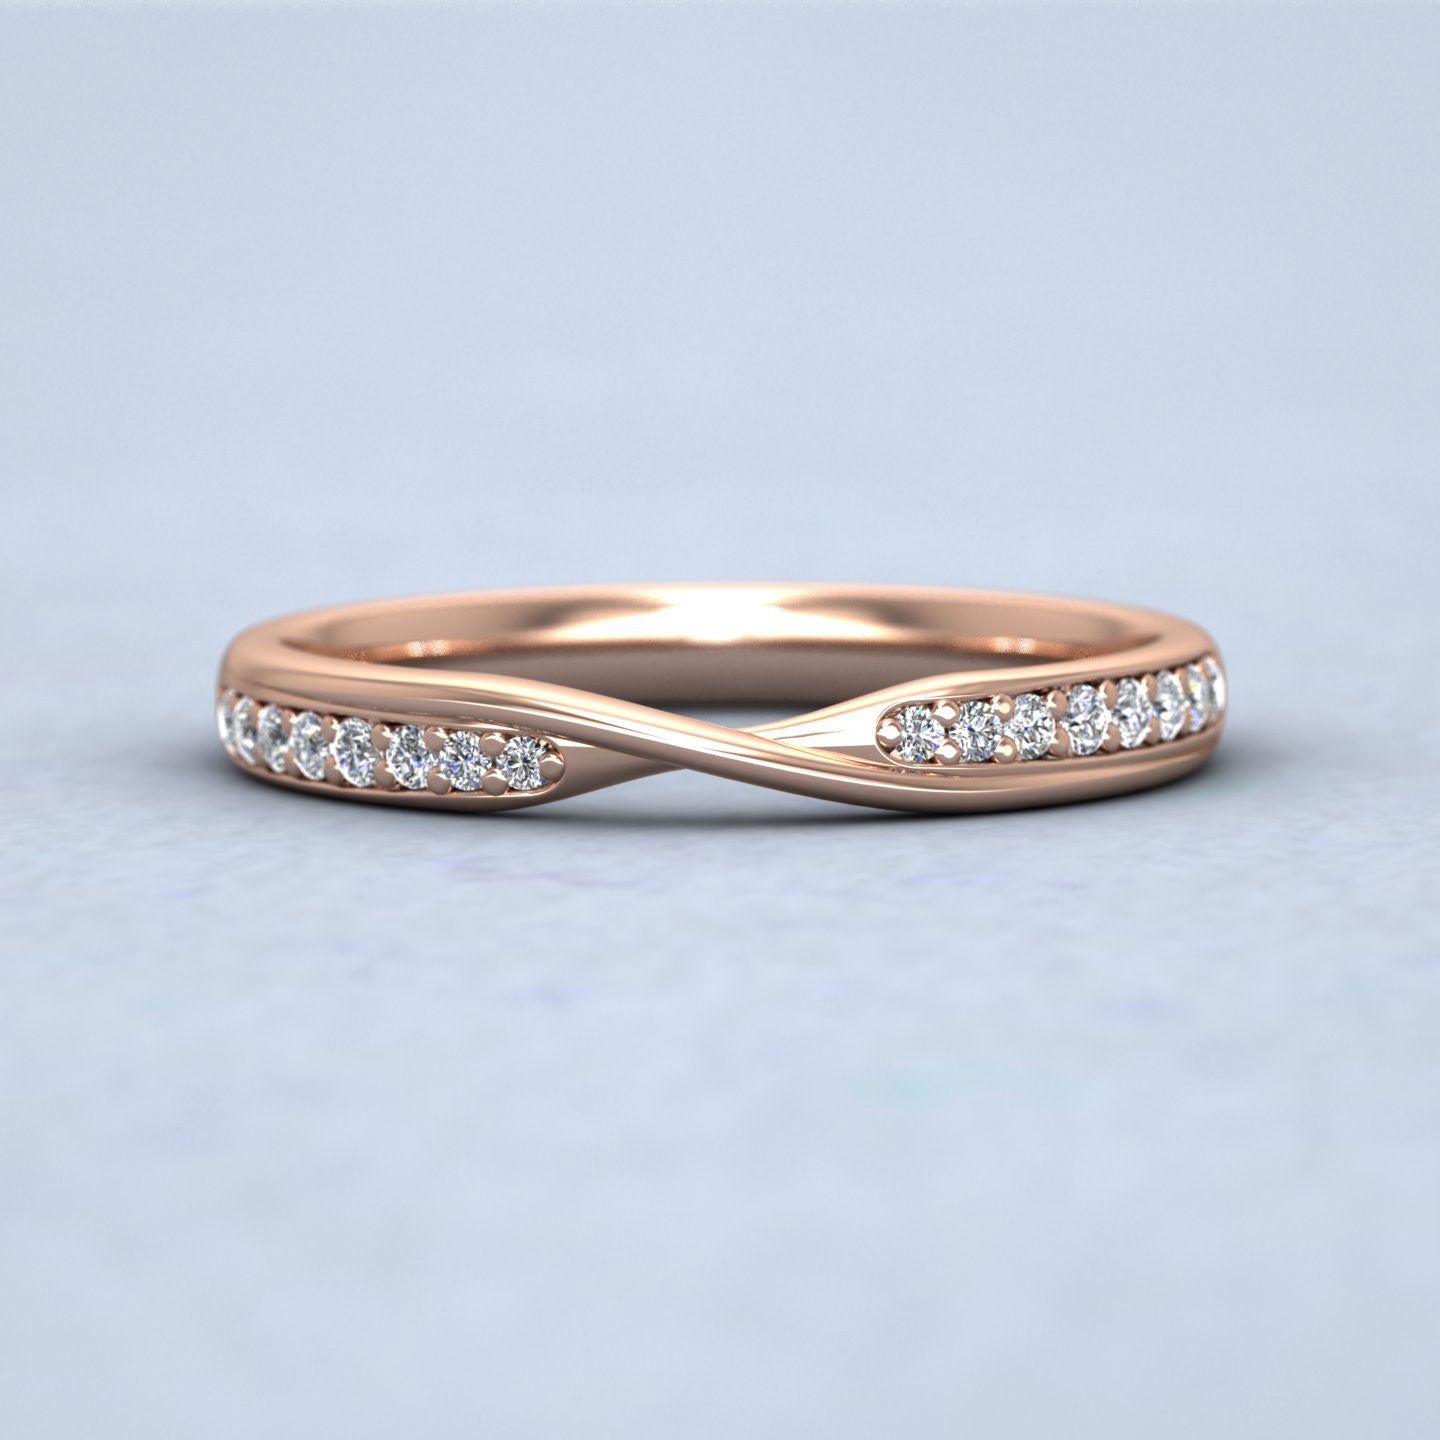 Crossover Pattern Wedding Ring In 9ct Rose Gold 2.5mm Wide With Sixteen Diamonds